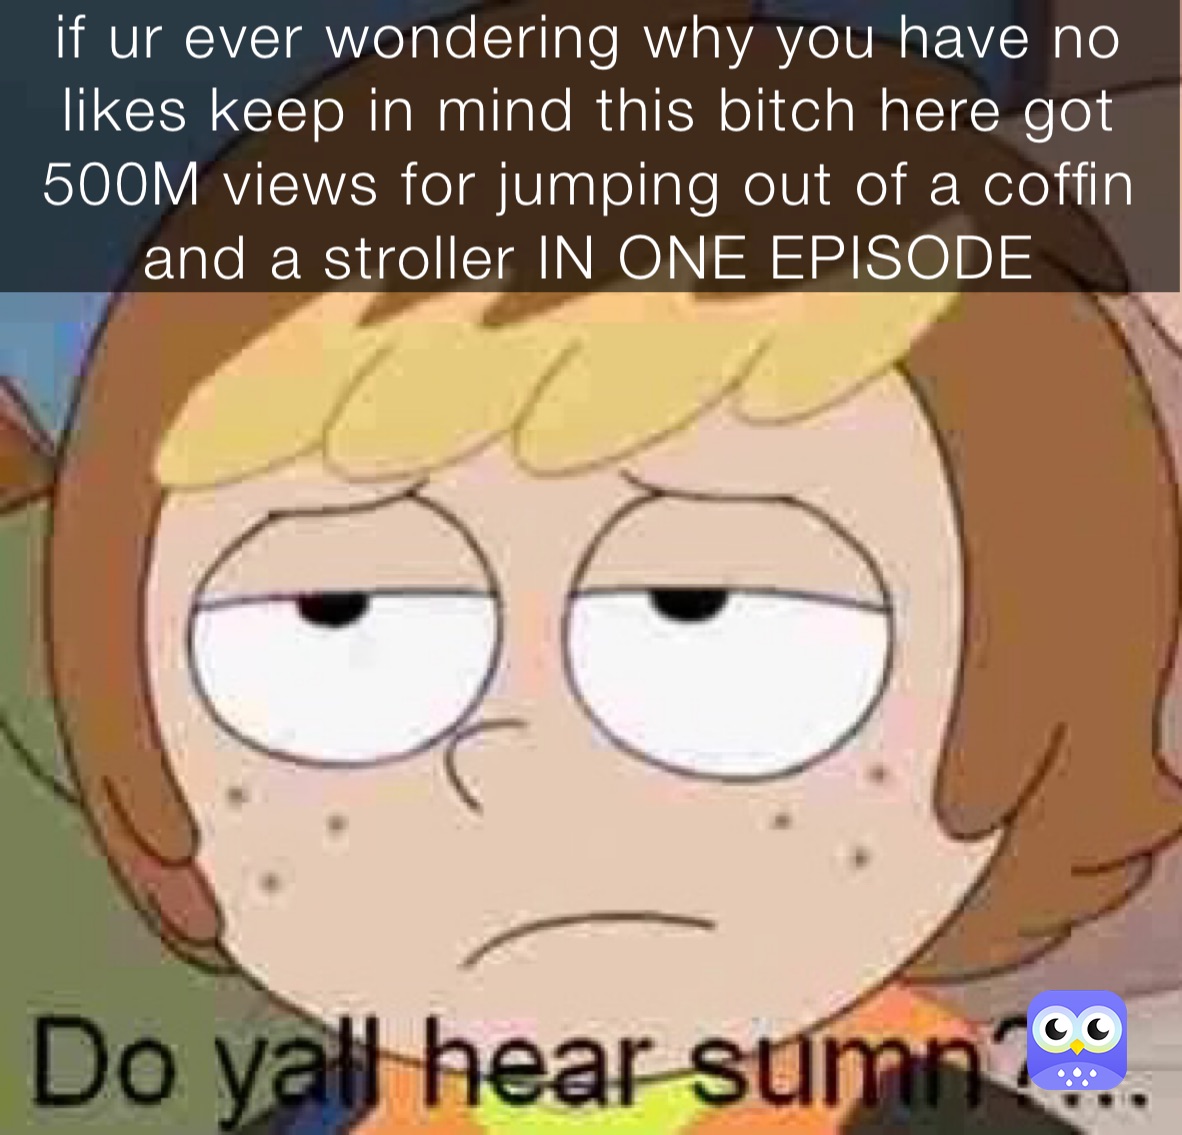 if ur ever wondering why you have no likes keep in mind this bitch here got 500M views for jumping out of a coffin and a stroller IN ONE EPISODE